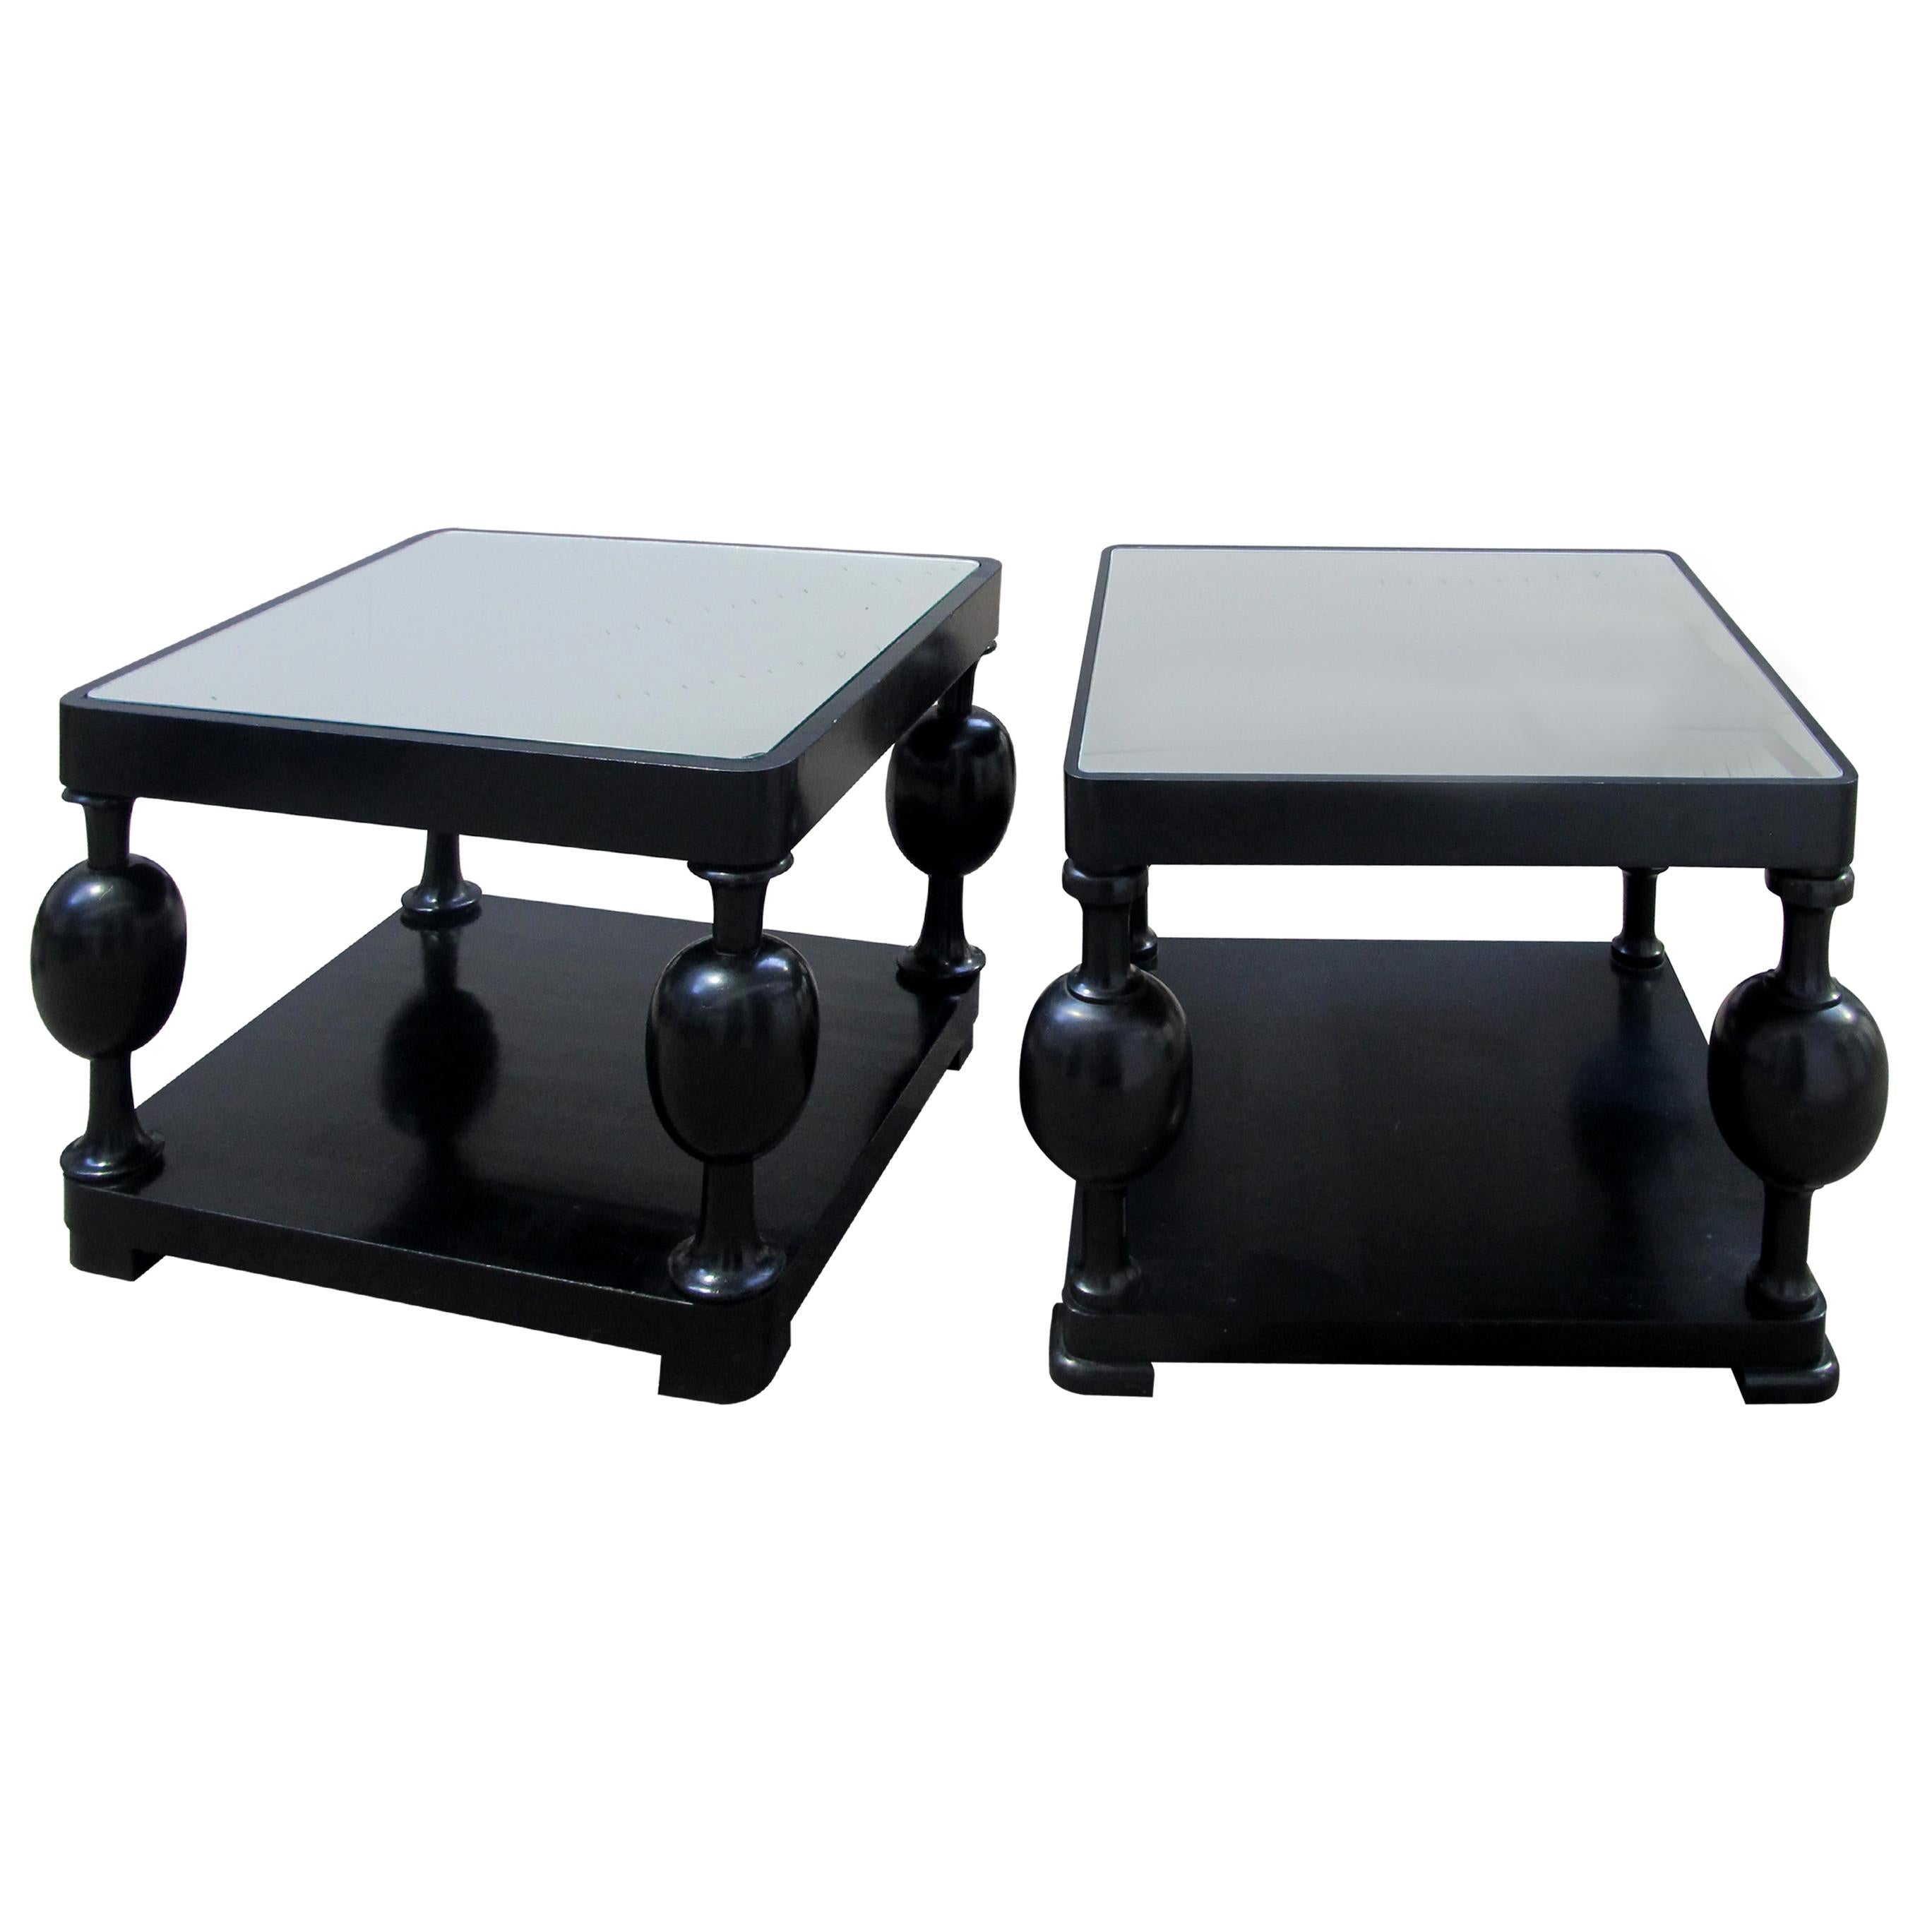 Set of two truly exceptional Art Deco Swedish side tables with mirrored tops. The tables have been made with birch wood and ebonized to achieve a stunning contemporary look without compromising on the Art Deco design. The legs between the two tiers